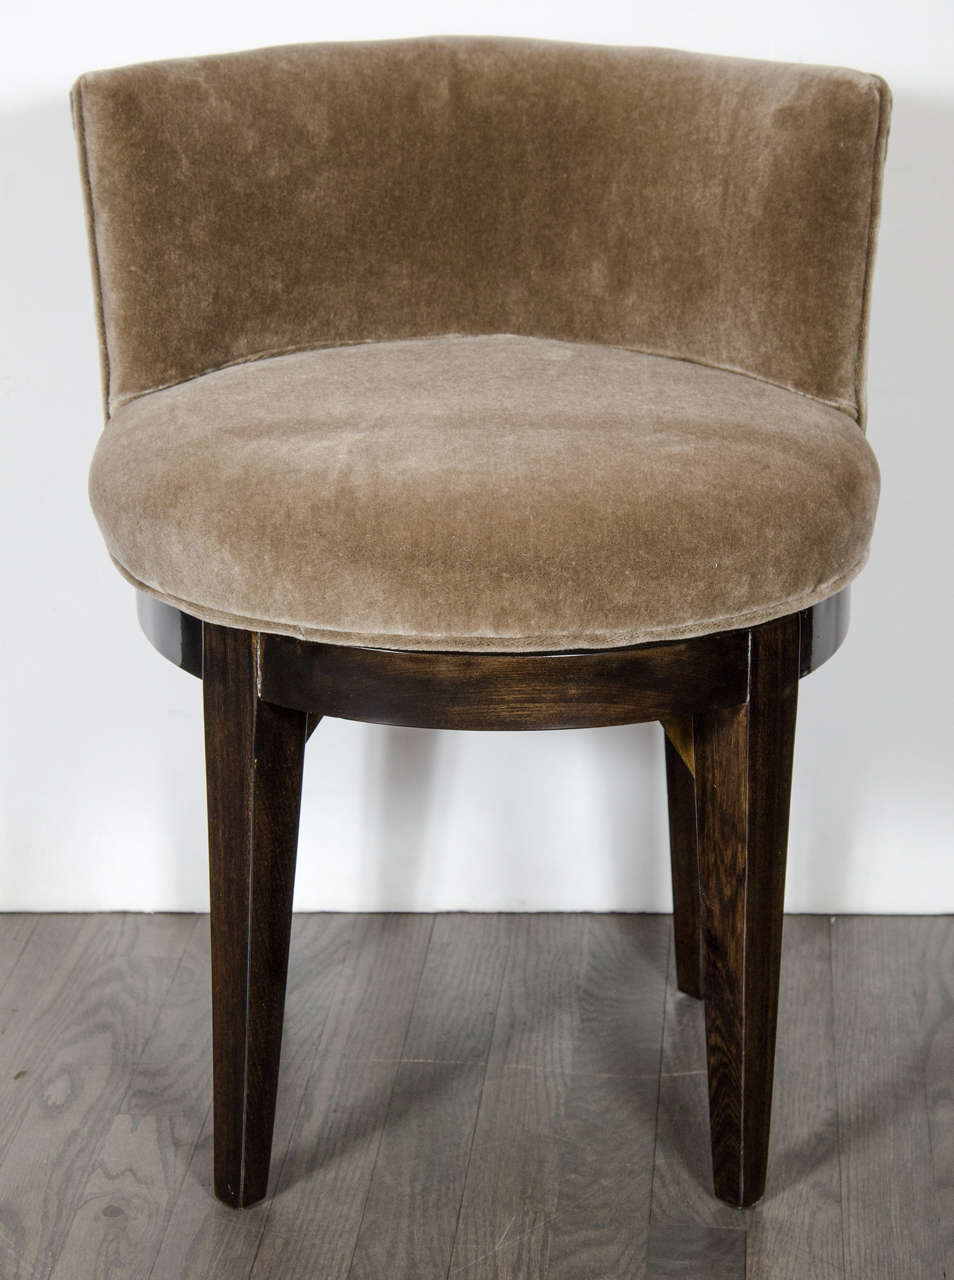 This elegant Art Deco Vanity stool features an upholstered swivel seat with lumbar support in smoked topaz mohair, the base is ebonized walnut with sturdy tapered legs. Restored to mint condition.